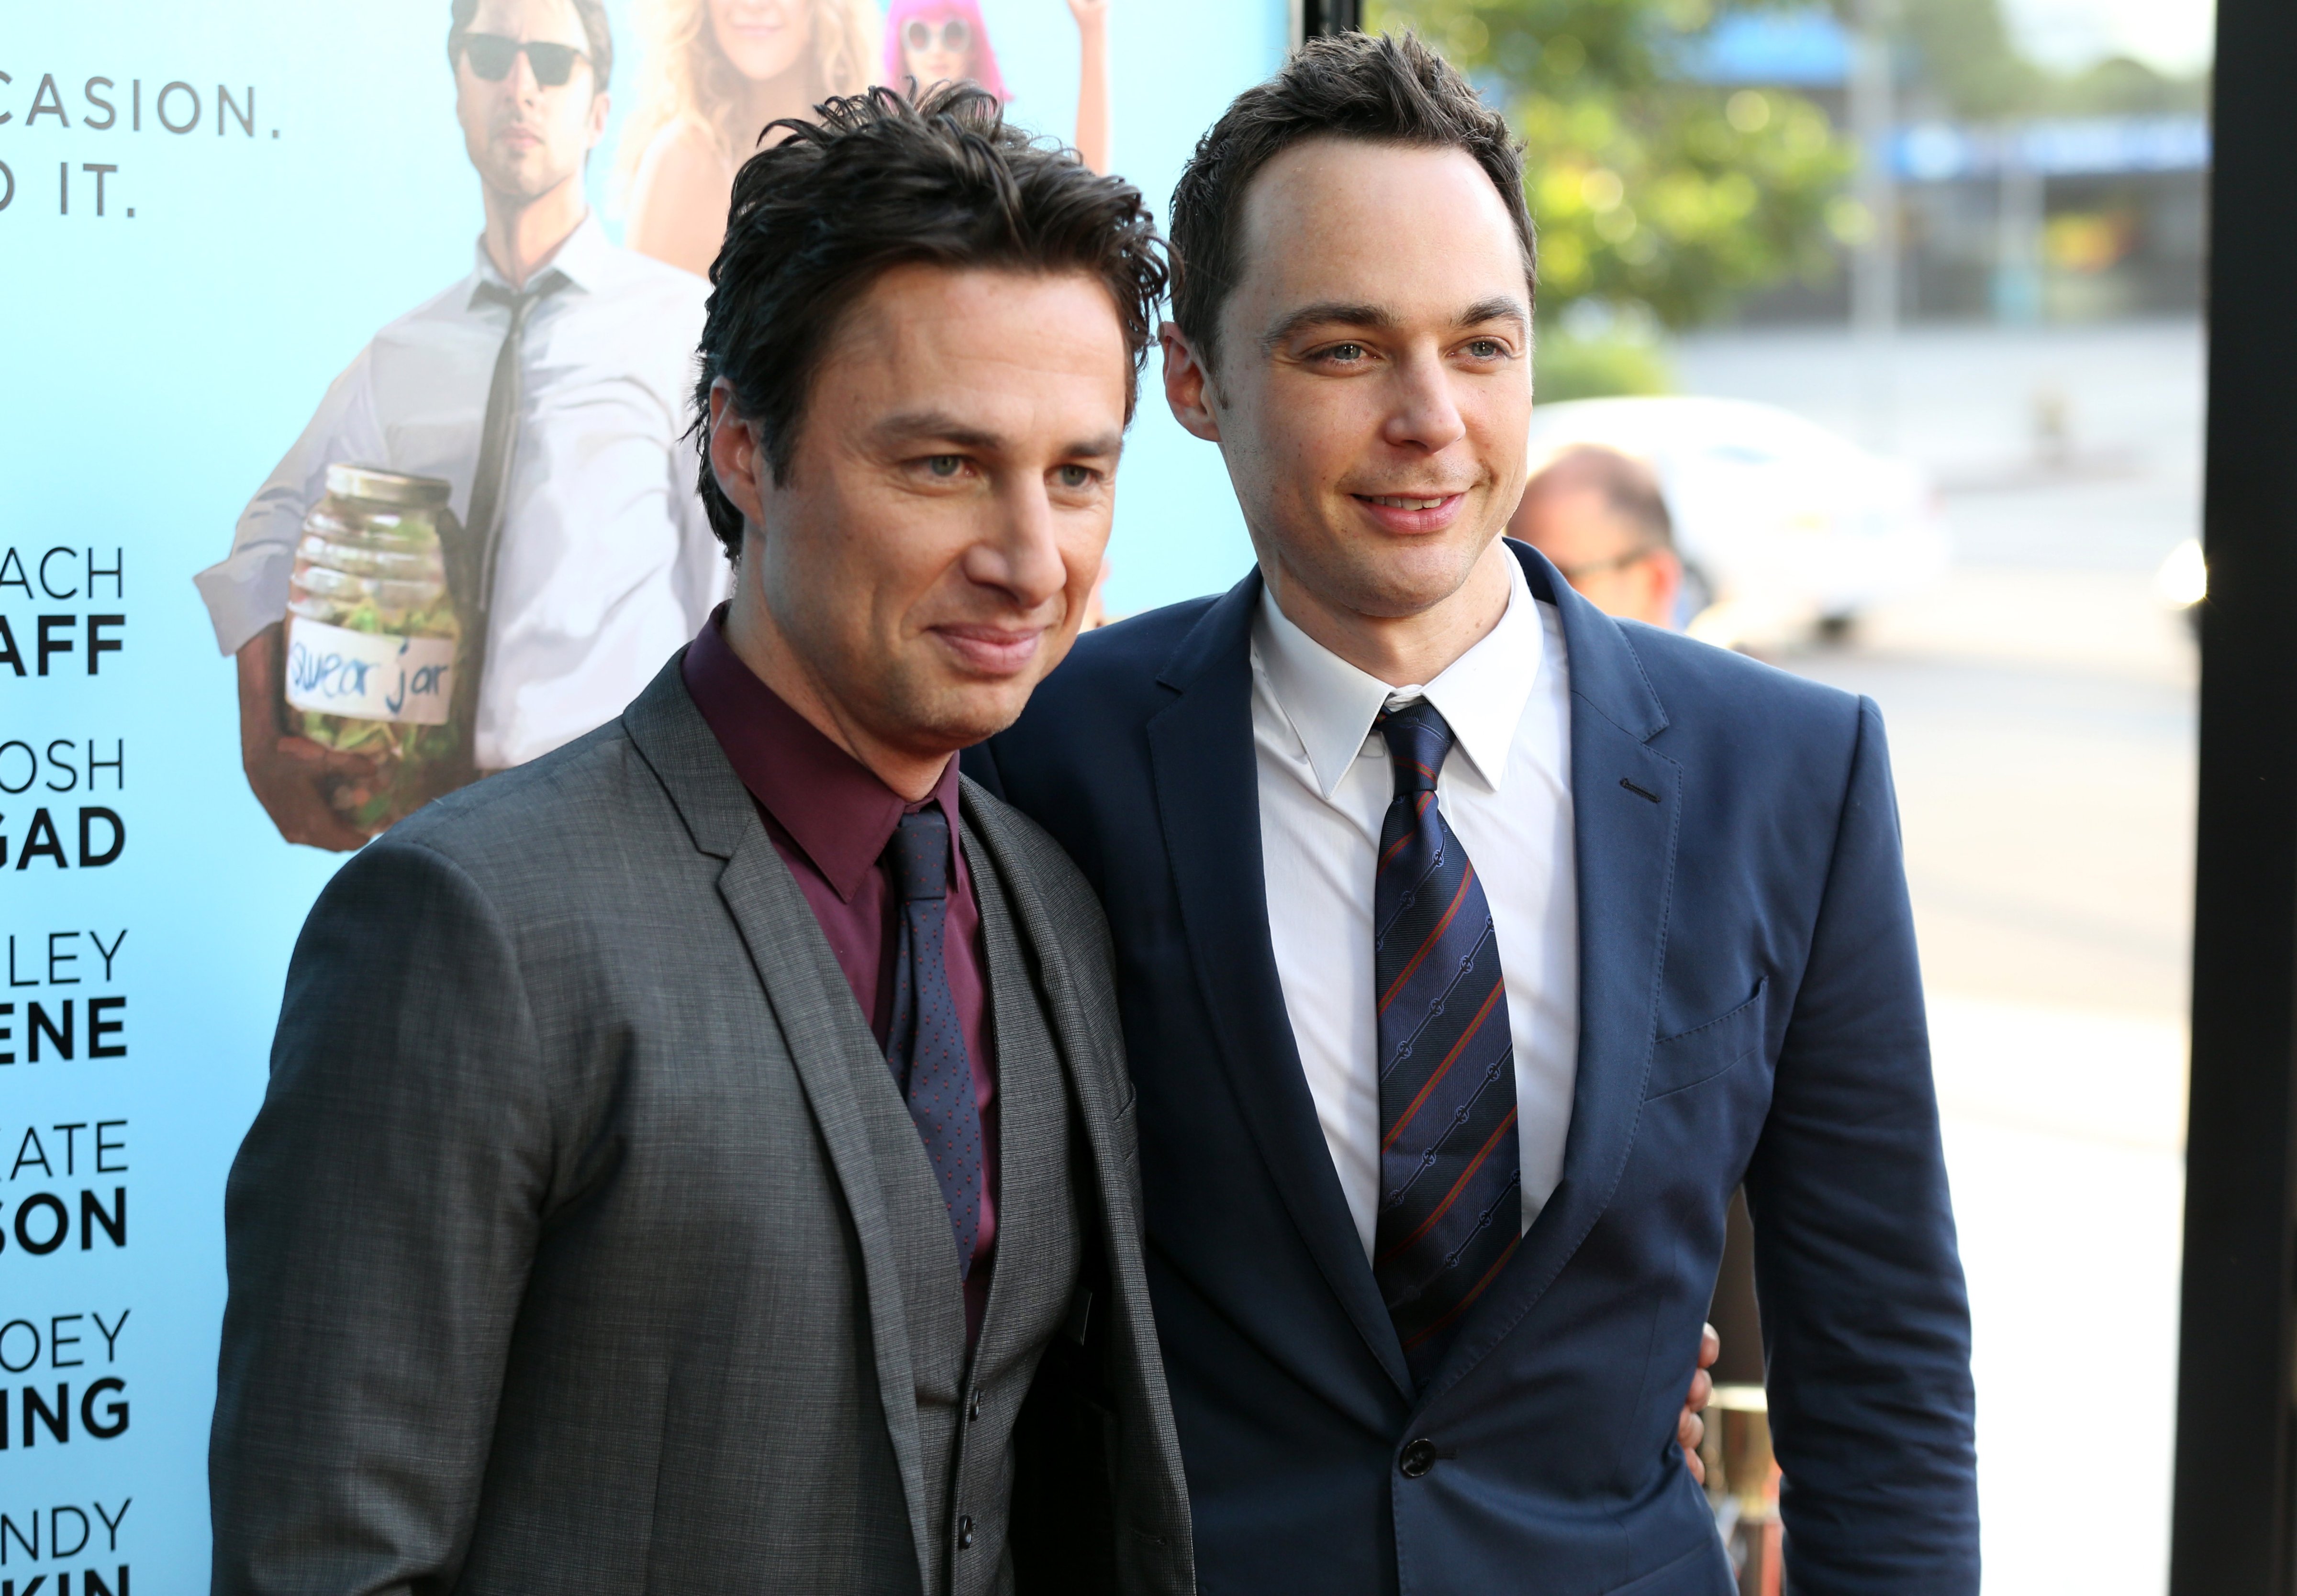 Zach Braff, left, and Jim Parsons at the premiere of <i>Wish I Was Here</i>. (Matt Sayles—Invision/AP)